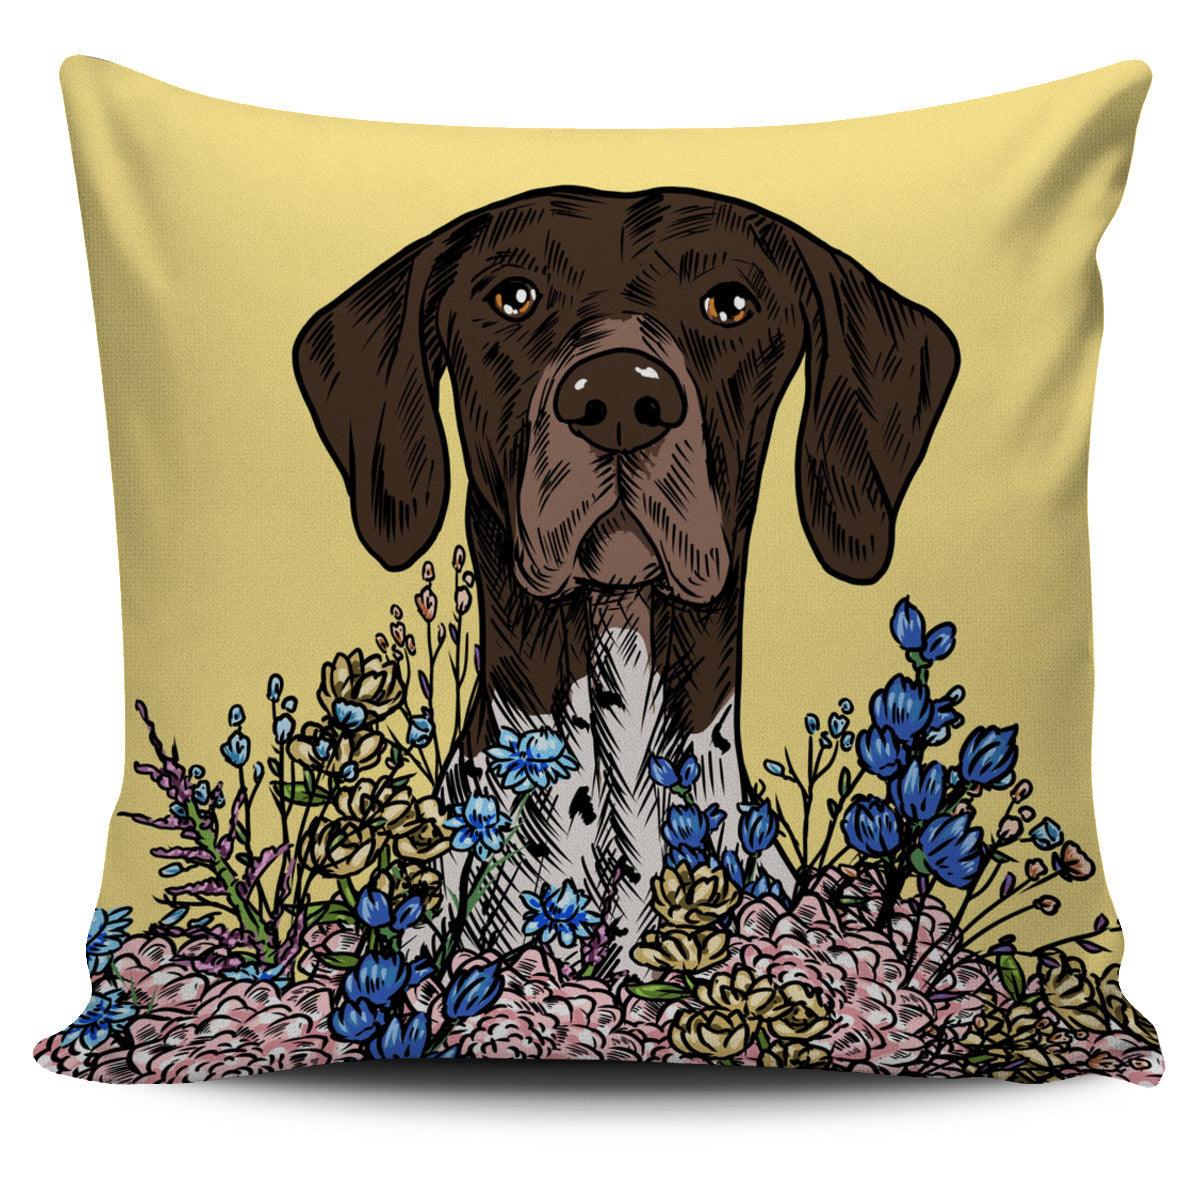 German Shorthaired Pointer Pillow, Dog Throw Pillows Home Decor - Dog Memorial Gift, Perfect Gift For German Shorthaired Pointer Lover, Dog Mom - Amzanimalsgift